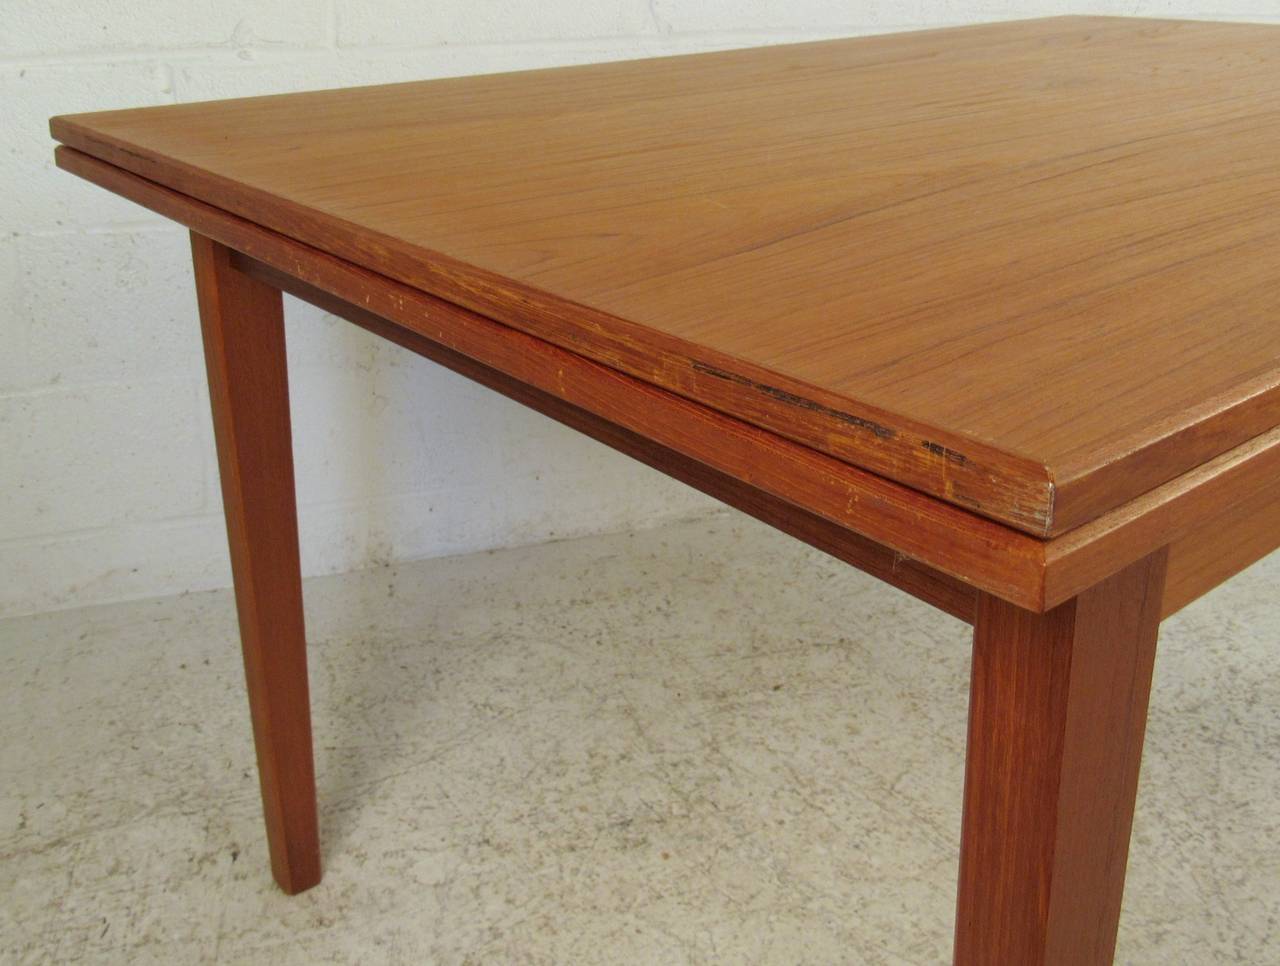 This stylish Danish modern dining table features a vintage teak finish and draw leaf design, expanding to almost 90 inches wide. Please confirm item location (NY or NJ).


Measure: Max length 89.5